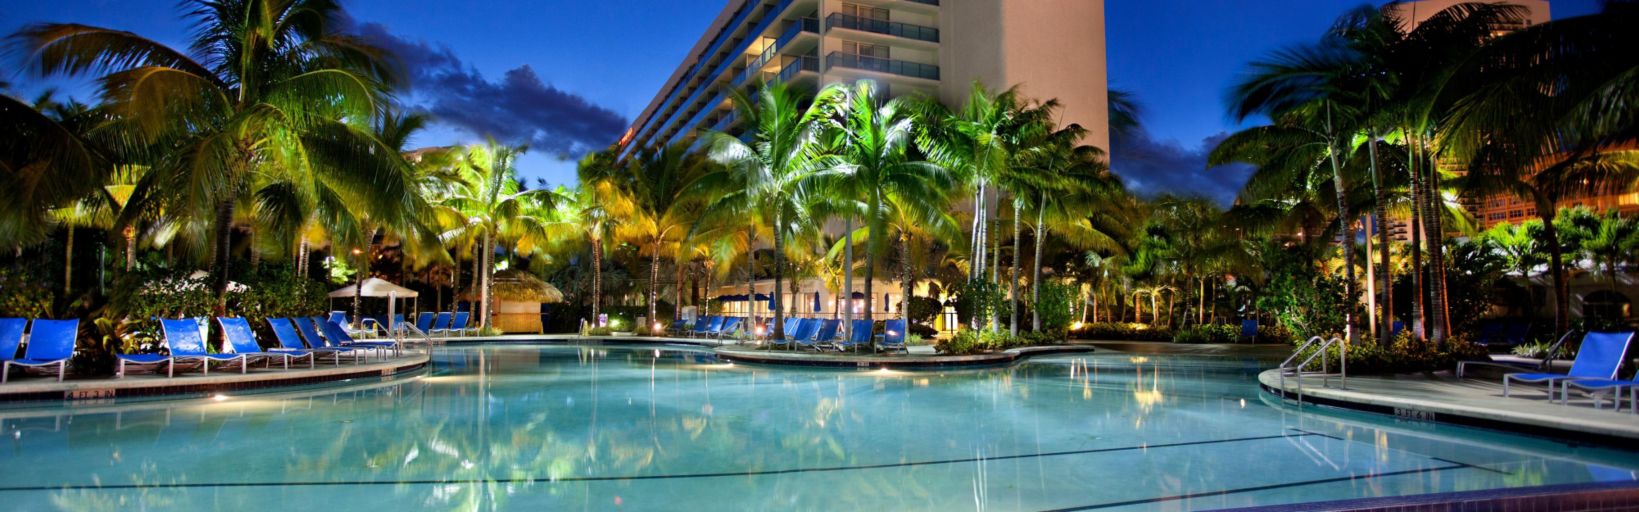 Crowne Plaza Hollywood Beach Resort Book Your Stay In Hollywood